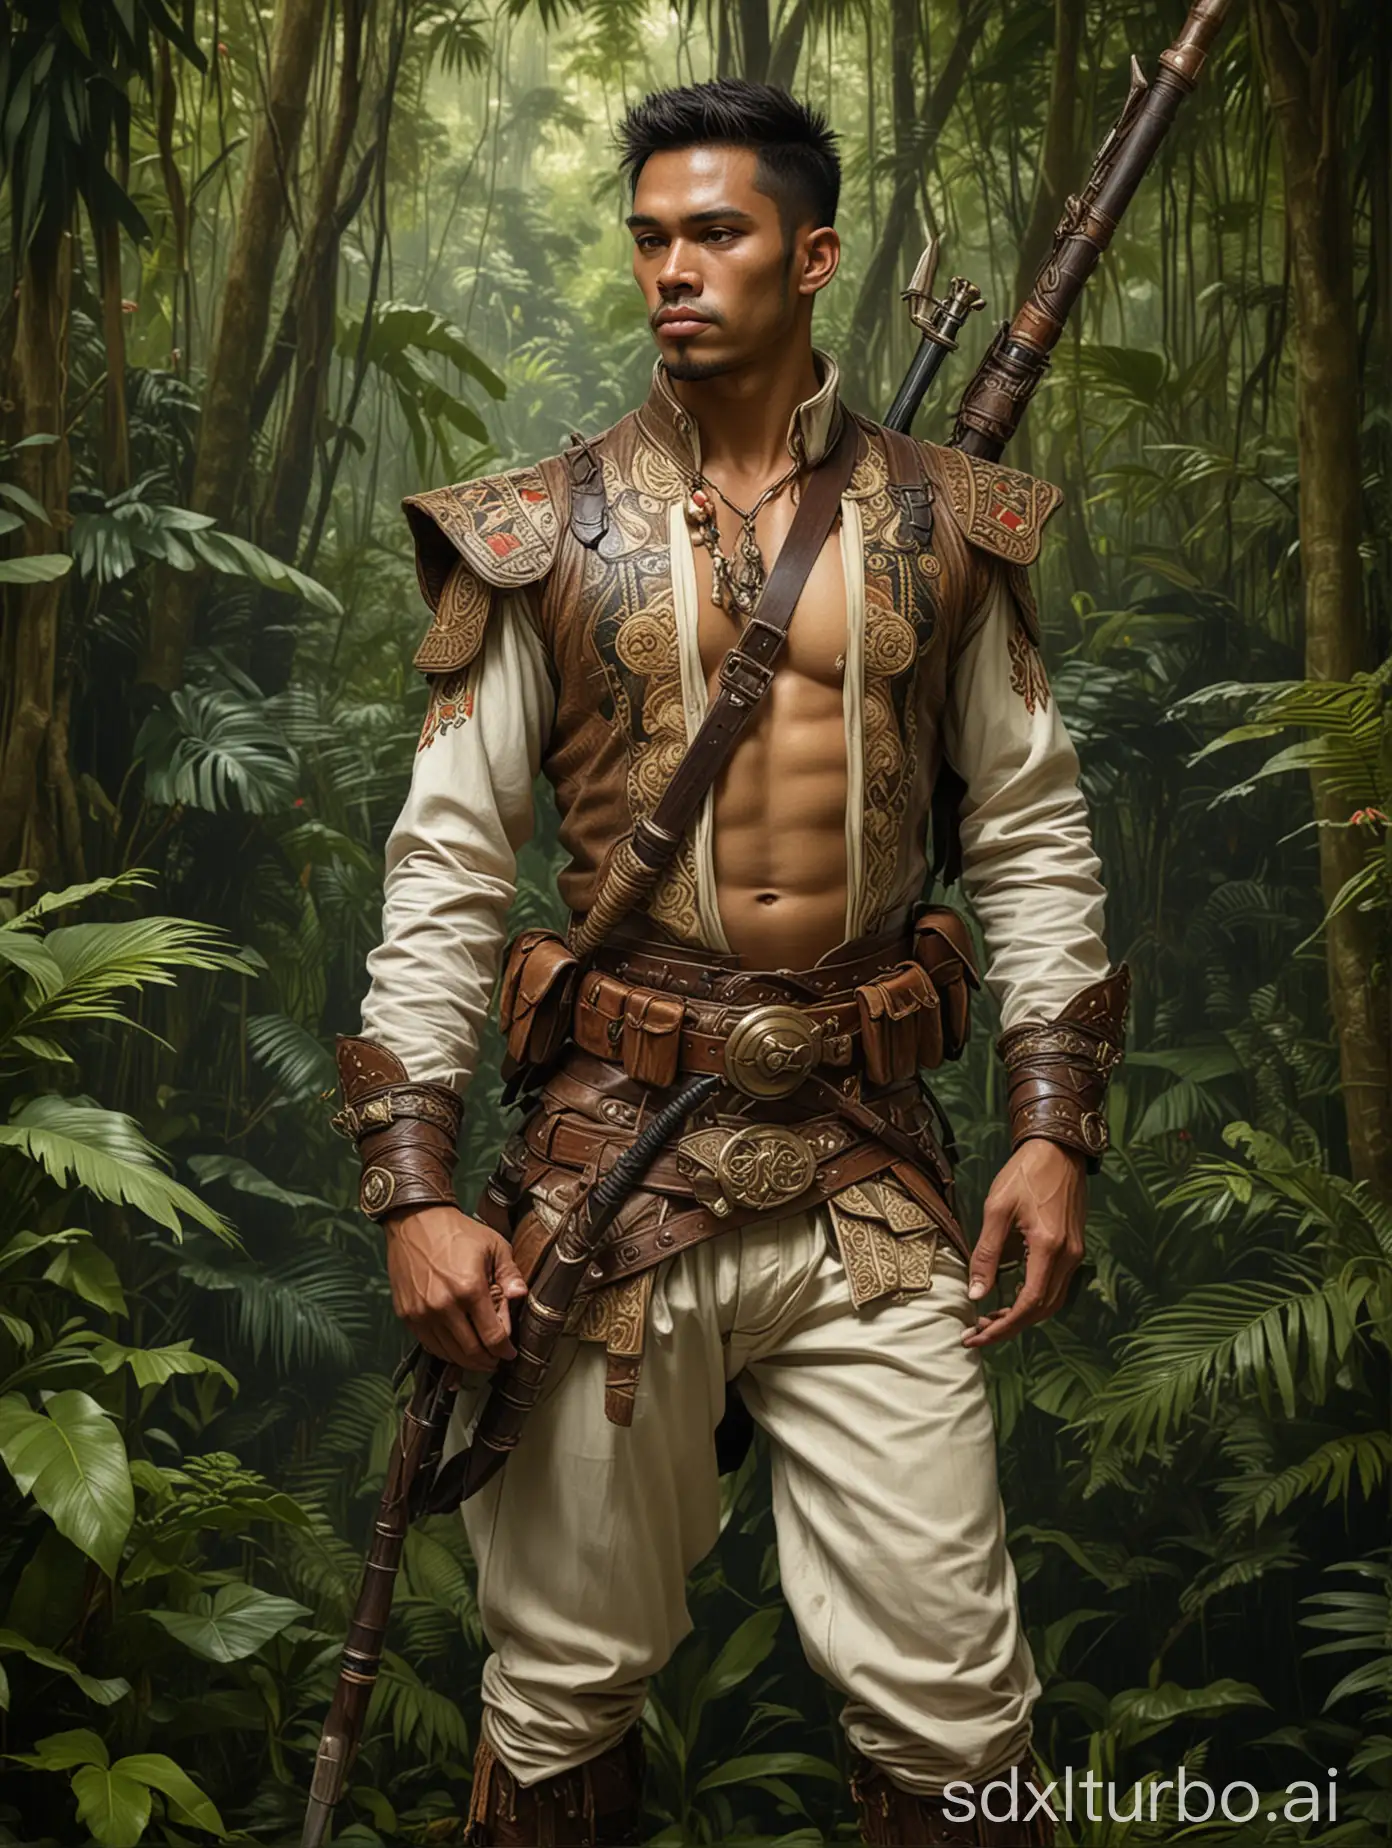 A full-body shot of a bulky exotic Maduranese descent guy, with a traditional sensual hunter costume. With a background of a lush Sumatran rainforest in the style of painting by Leyendecker